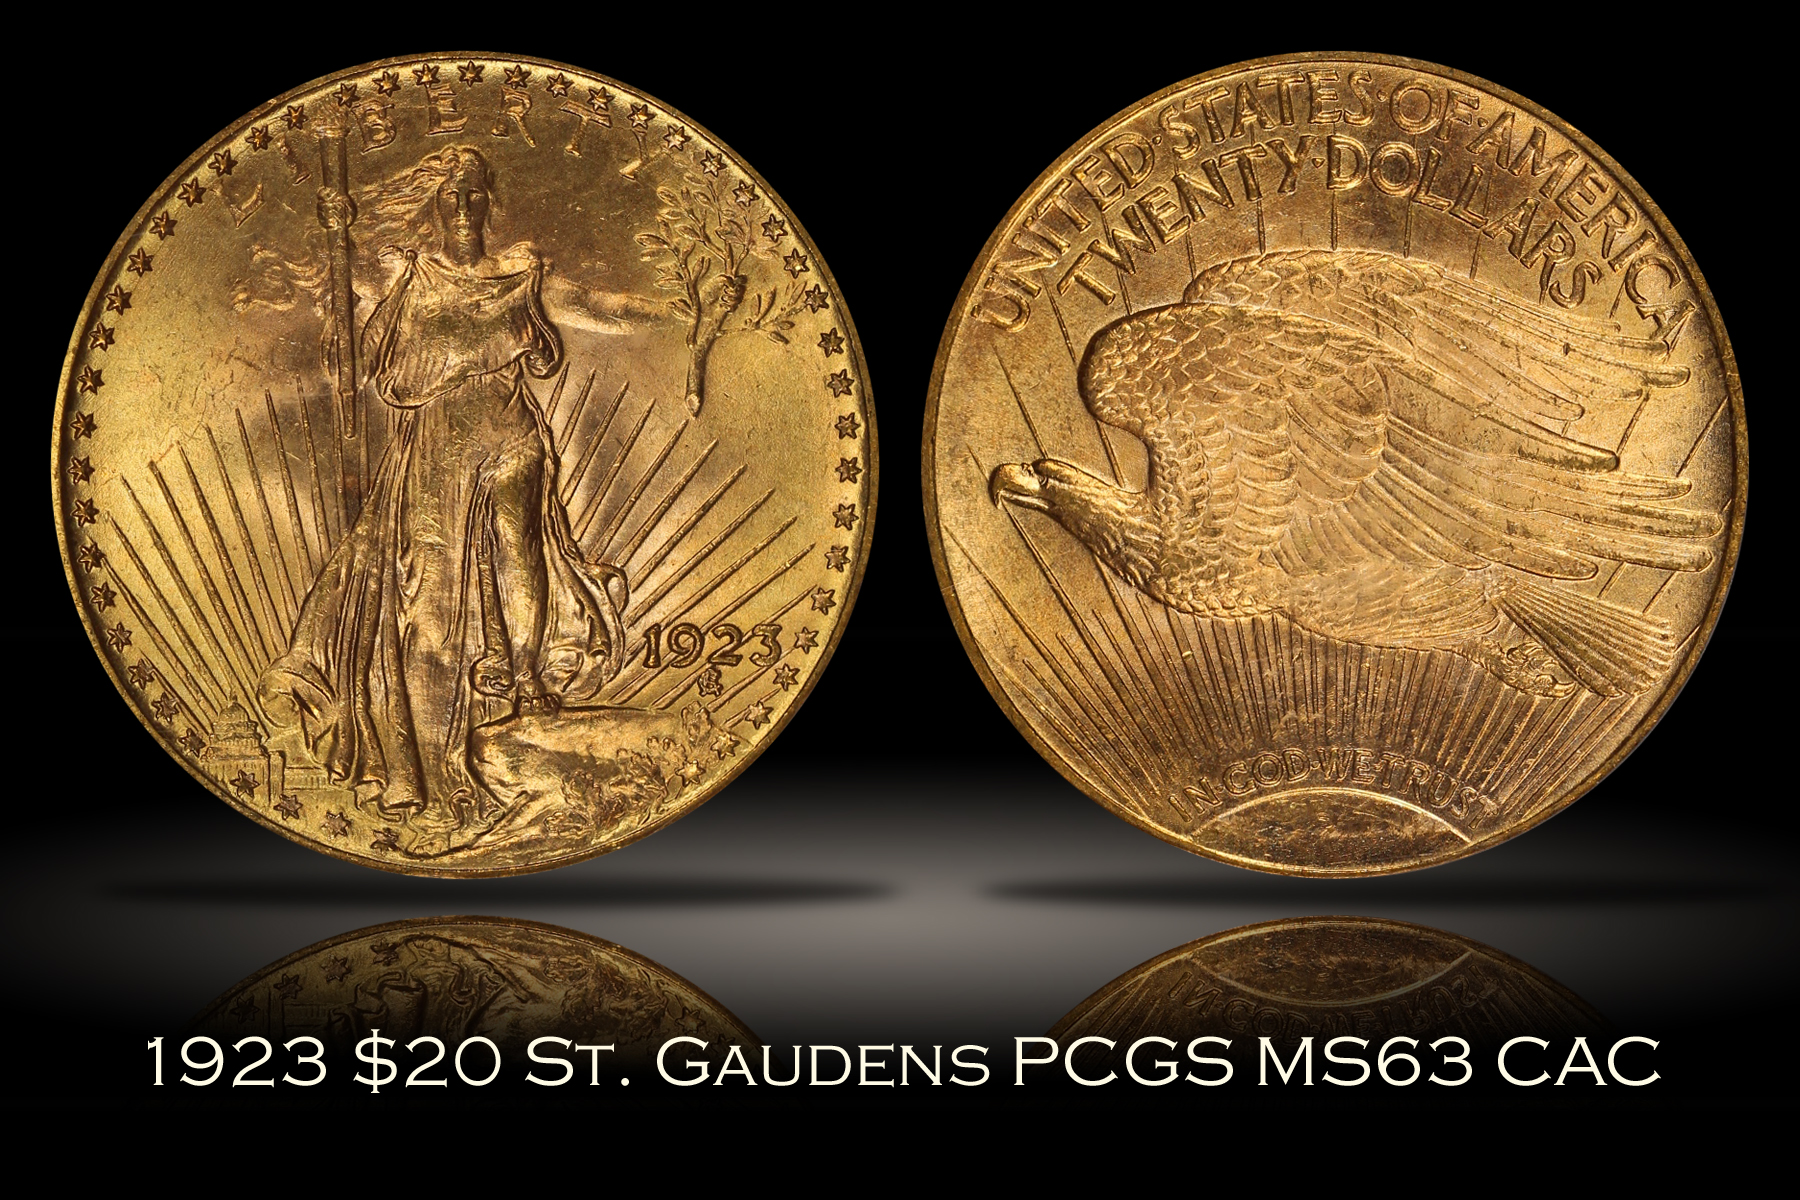 Michael Kittle Rare Coins - 1923 $20 St. Gaudens Gold PCGS MS63 OGH CAC